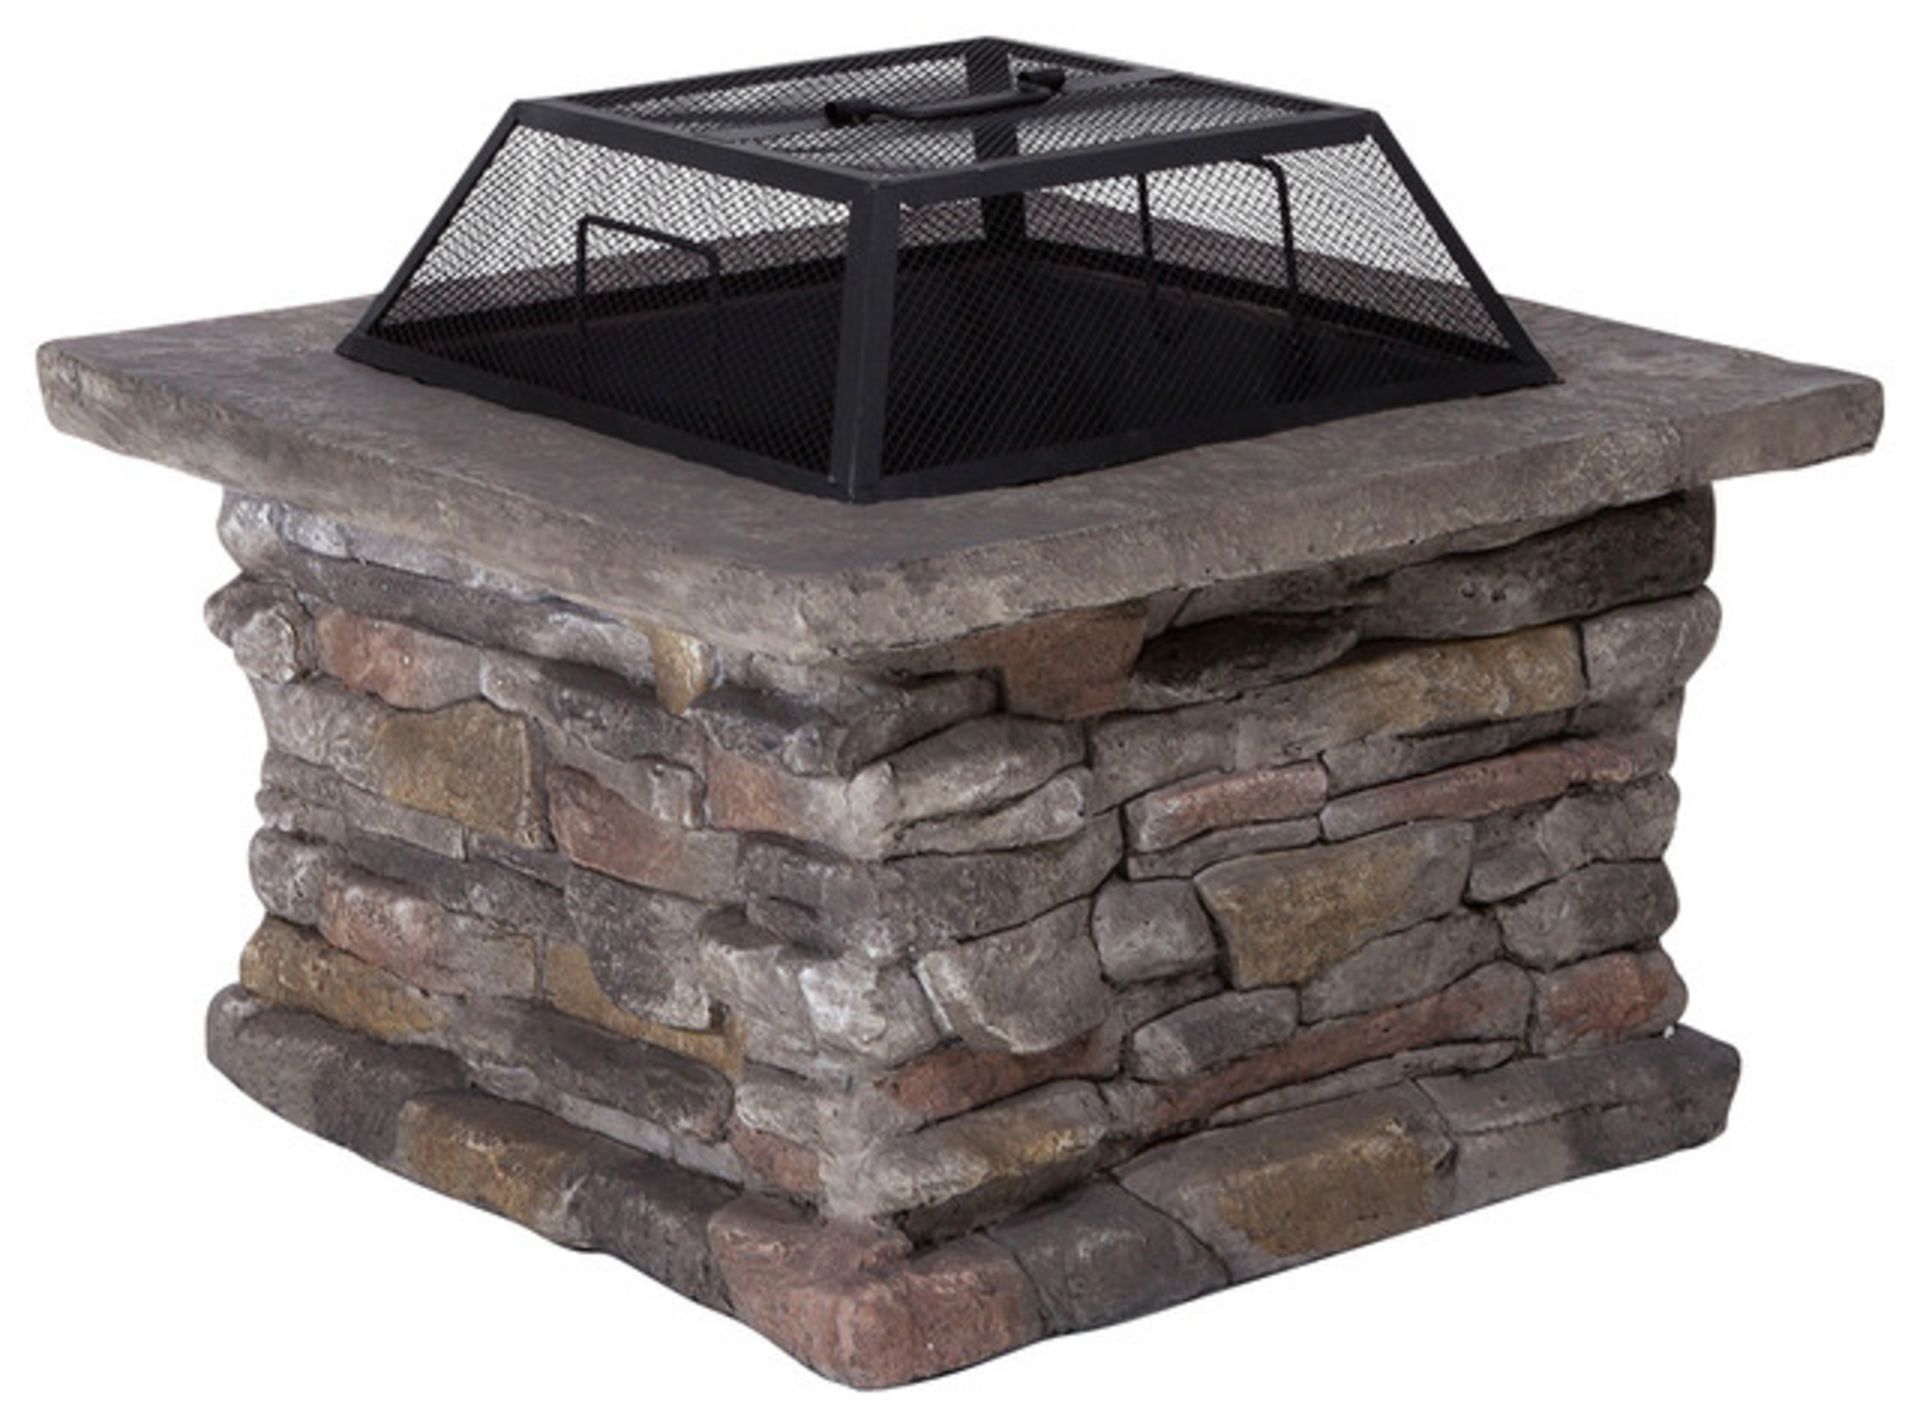 V Brand New Square Wood Burning Firepit 74 x 74 x 58 cm (WxDxH) Includes Fire Bowl, Base, Charcoal